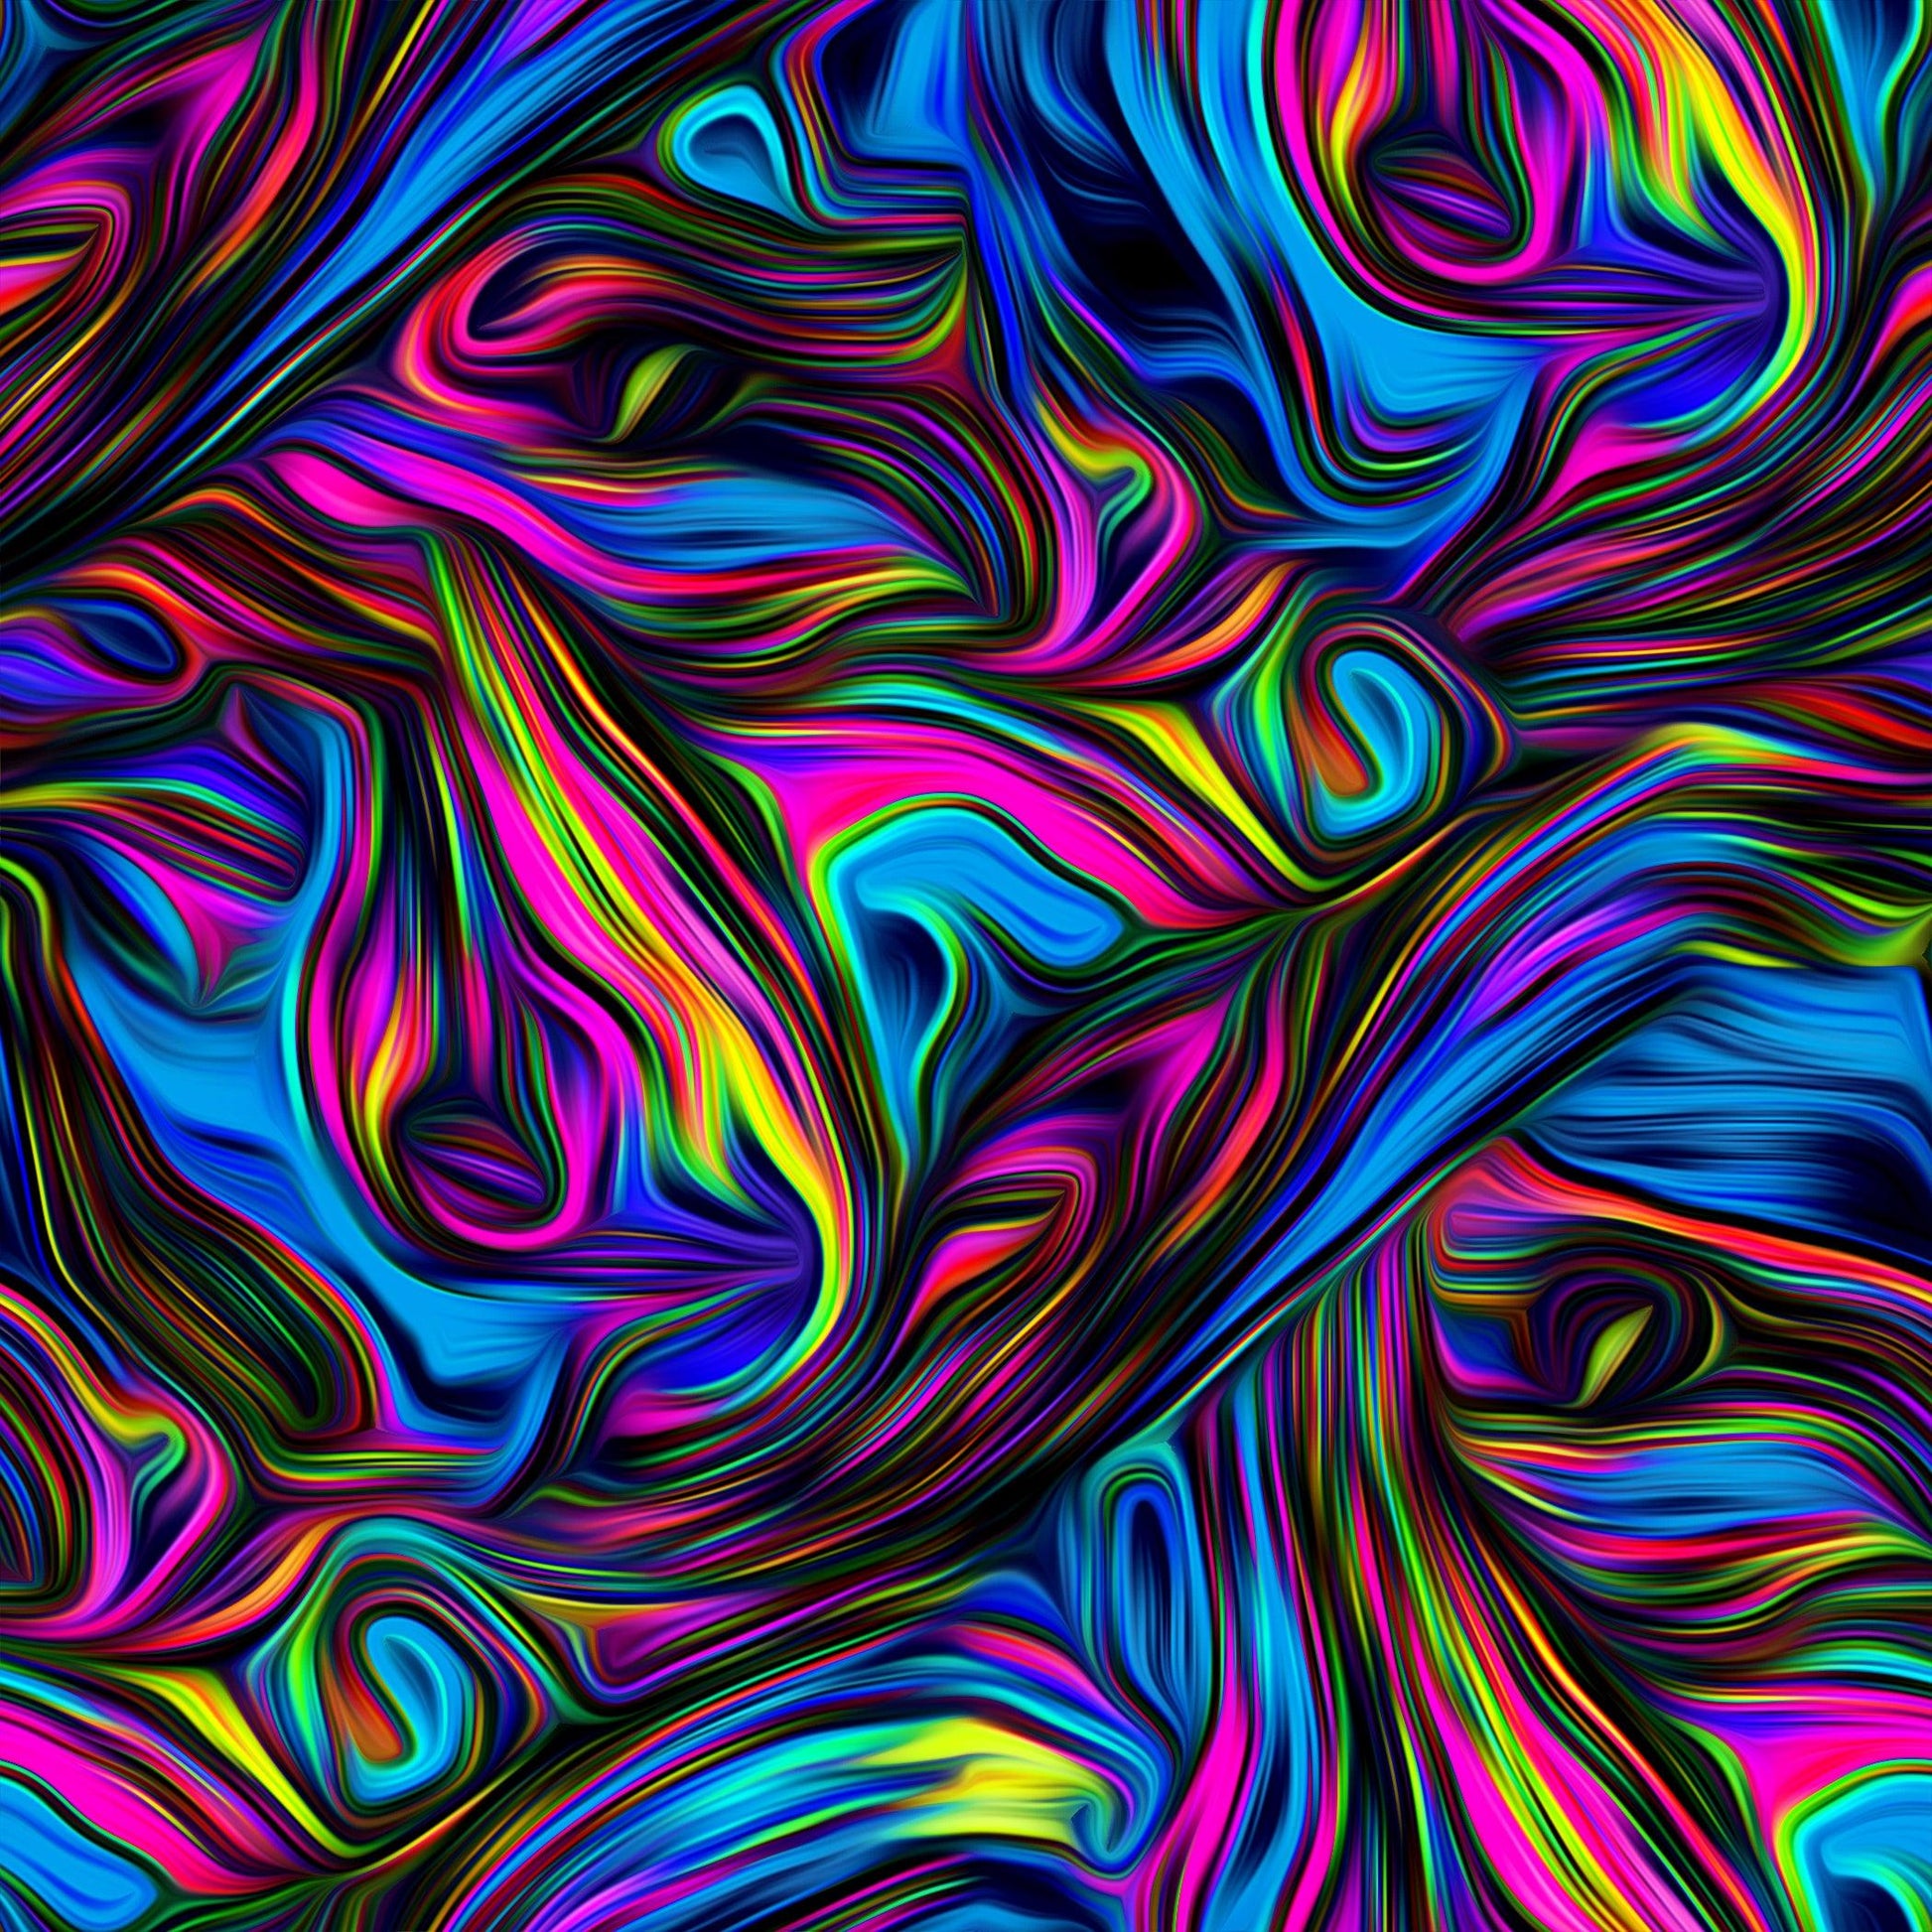 Psychedelic Swirl on 1 mil PUL Fabric - Made in the USA - Nature's Fabrics